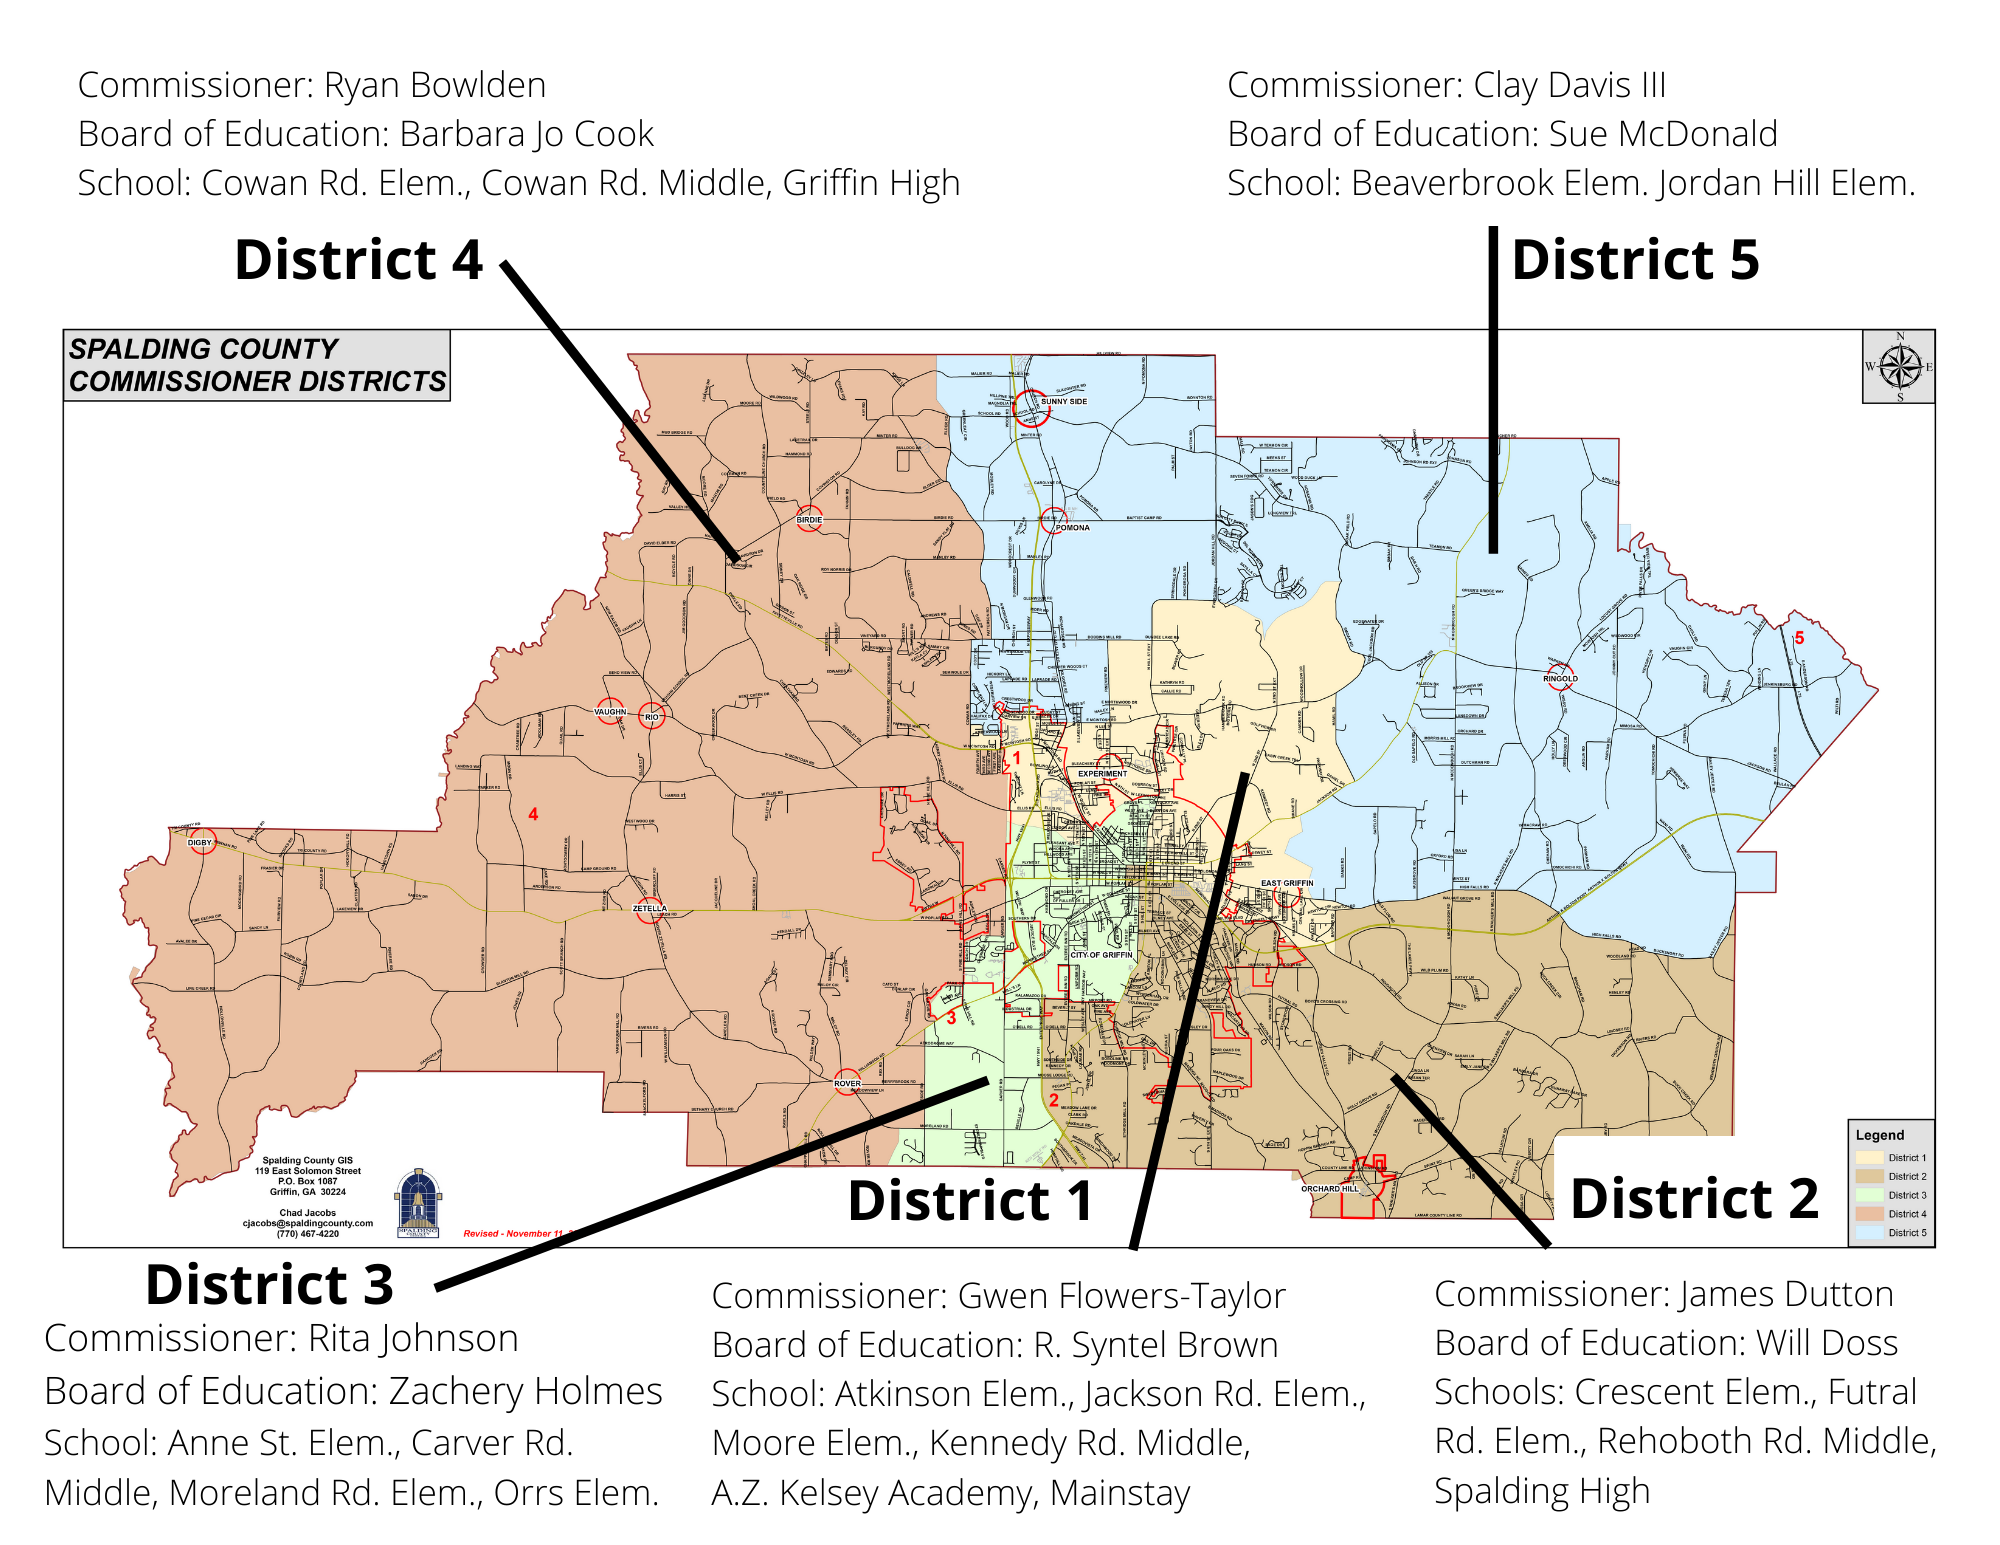 Spalding County Commissioner Districts map